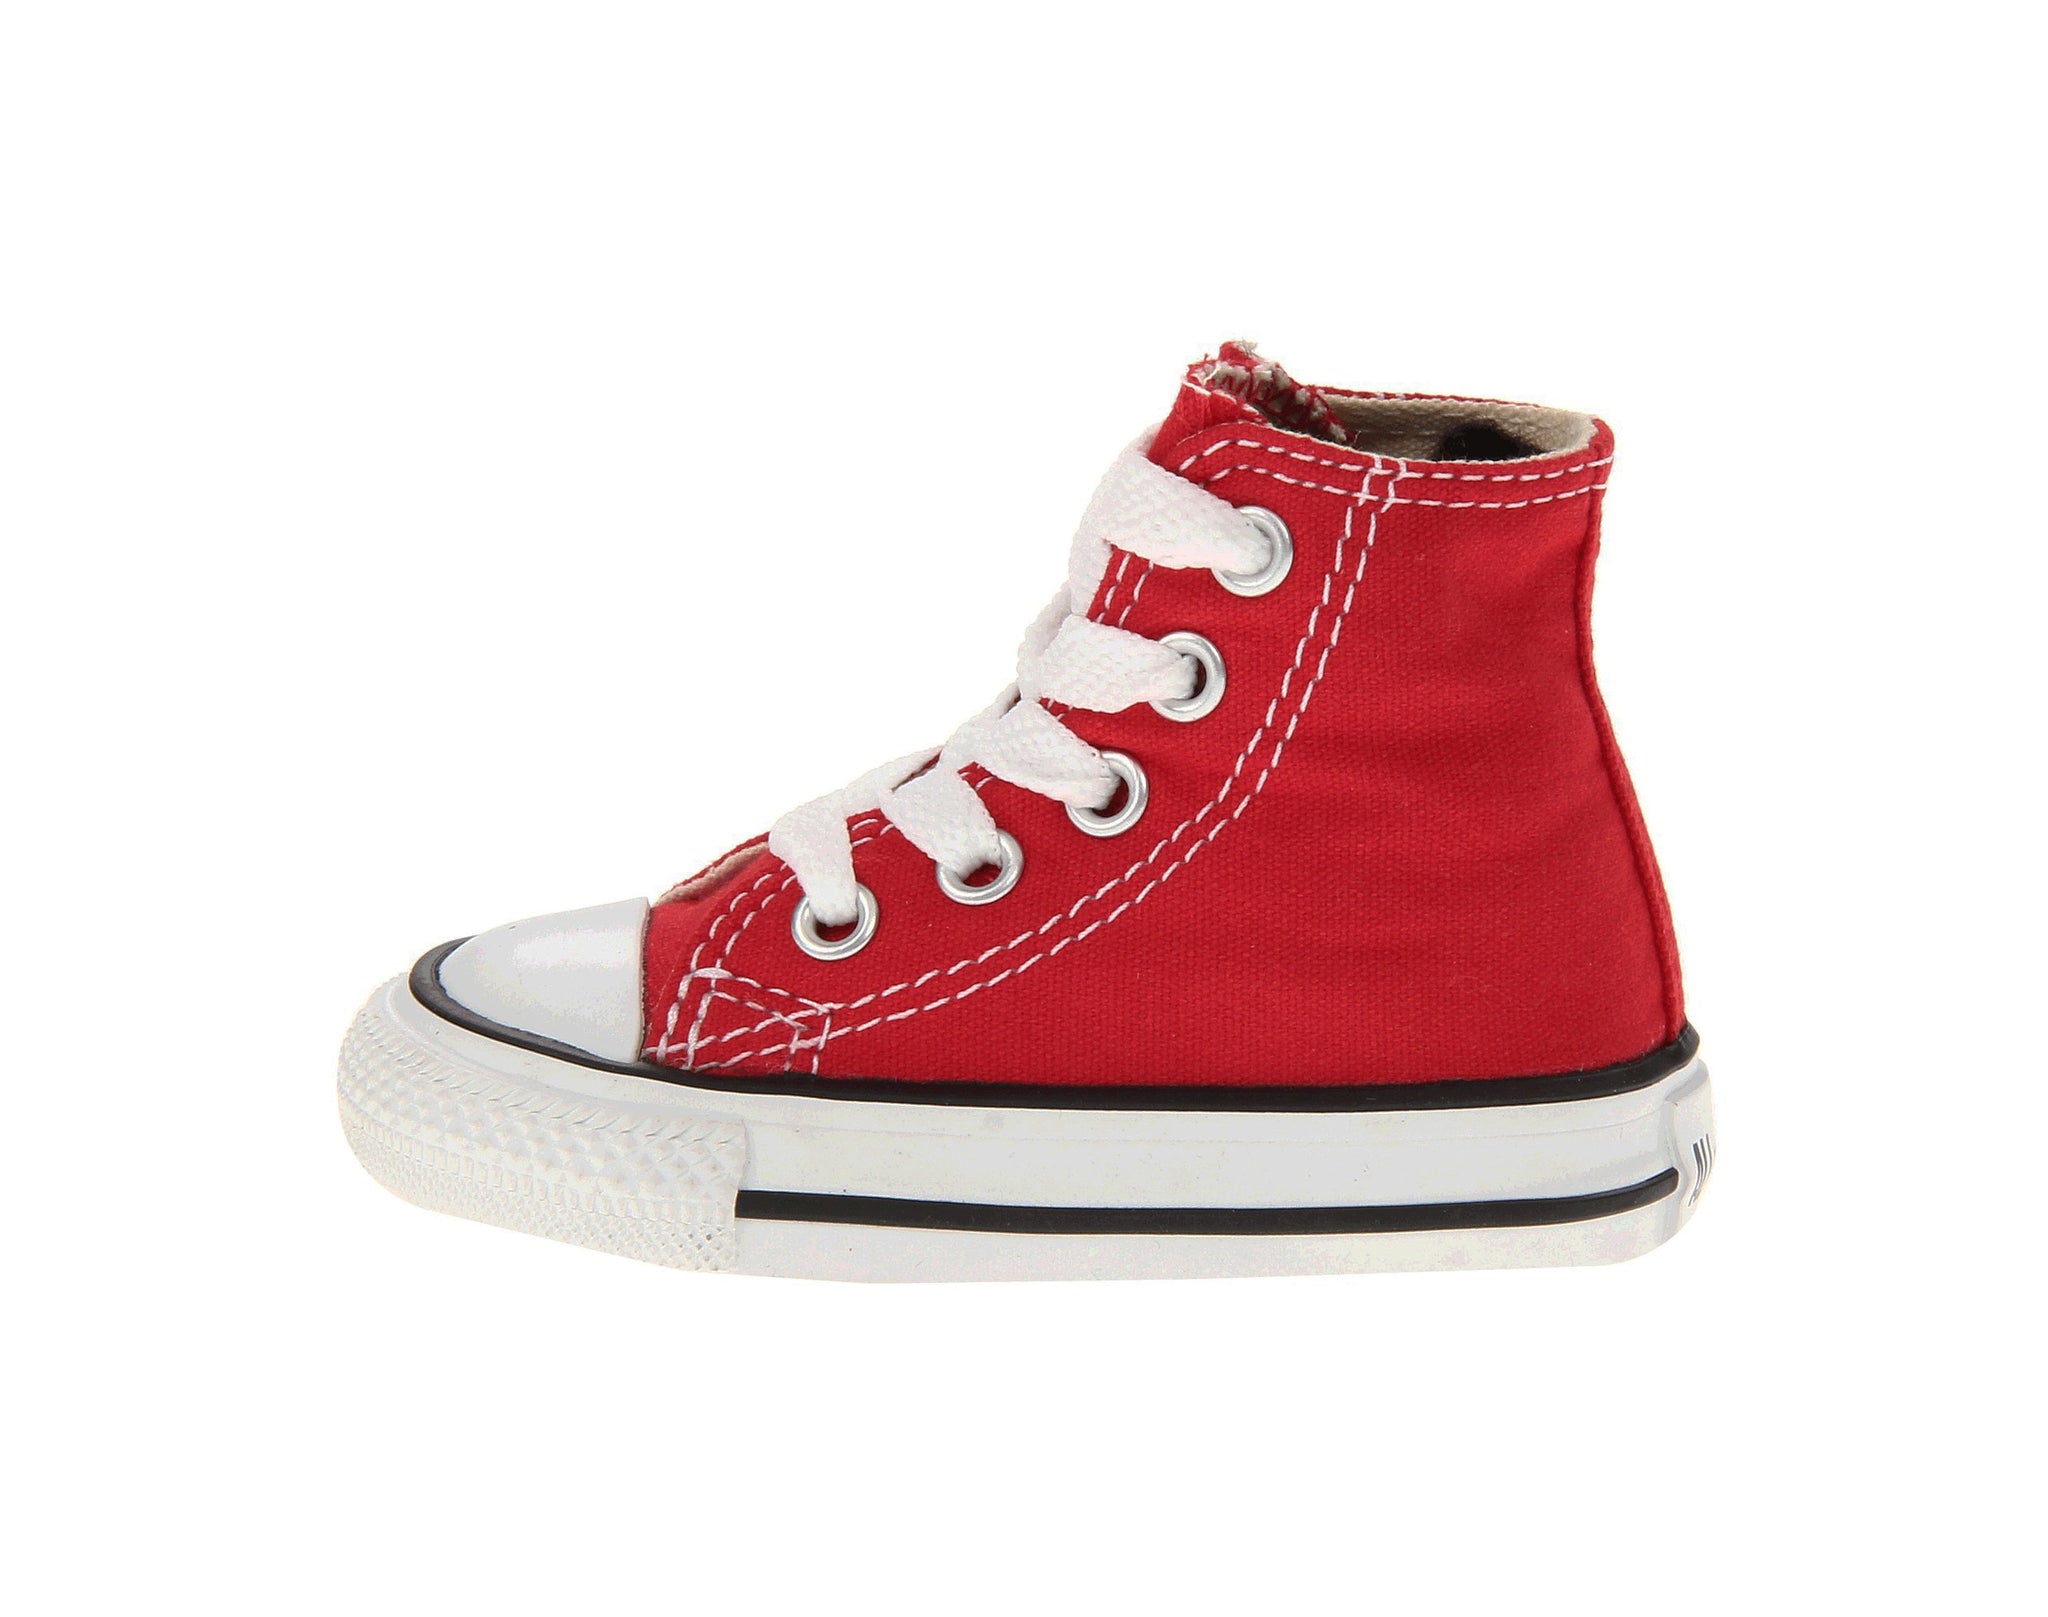 [7J232] Converse All Star Hi Top Toddler/Infant Baby Shoes